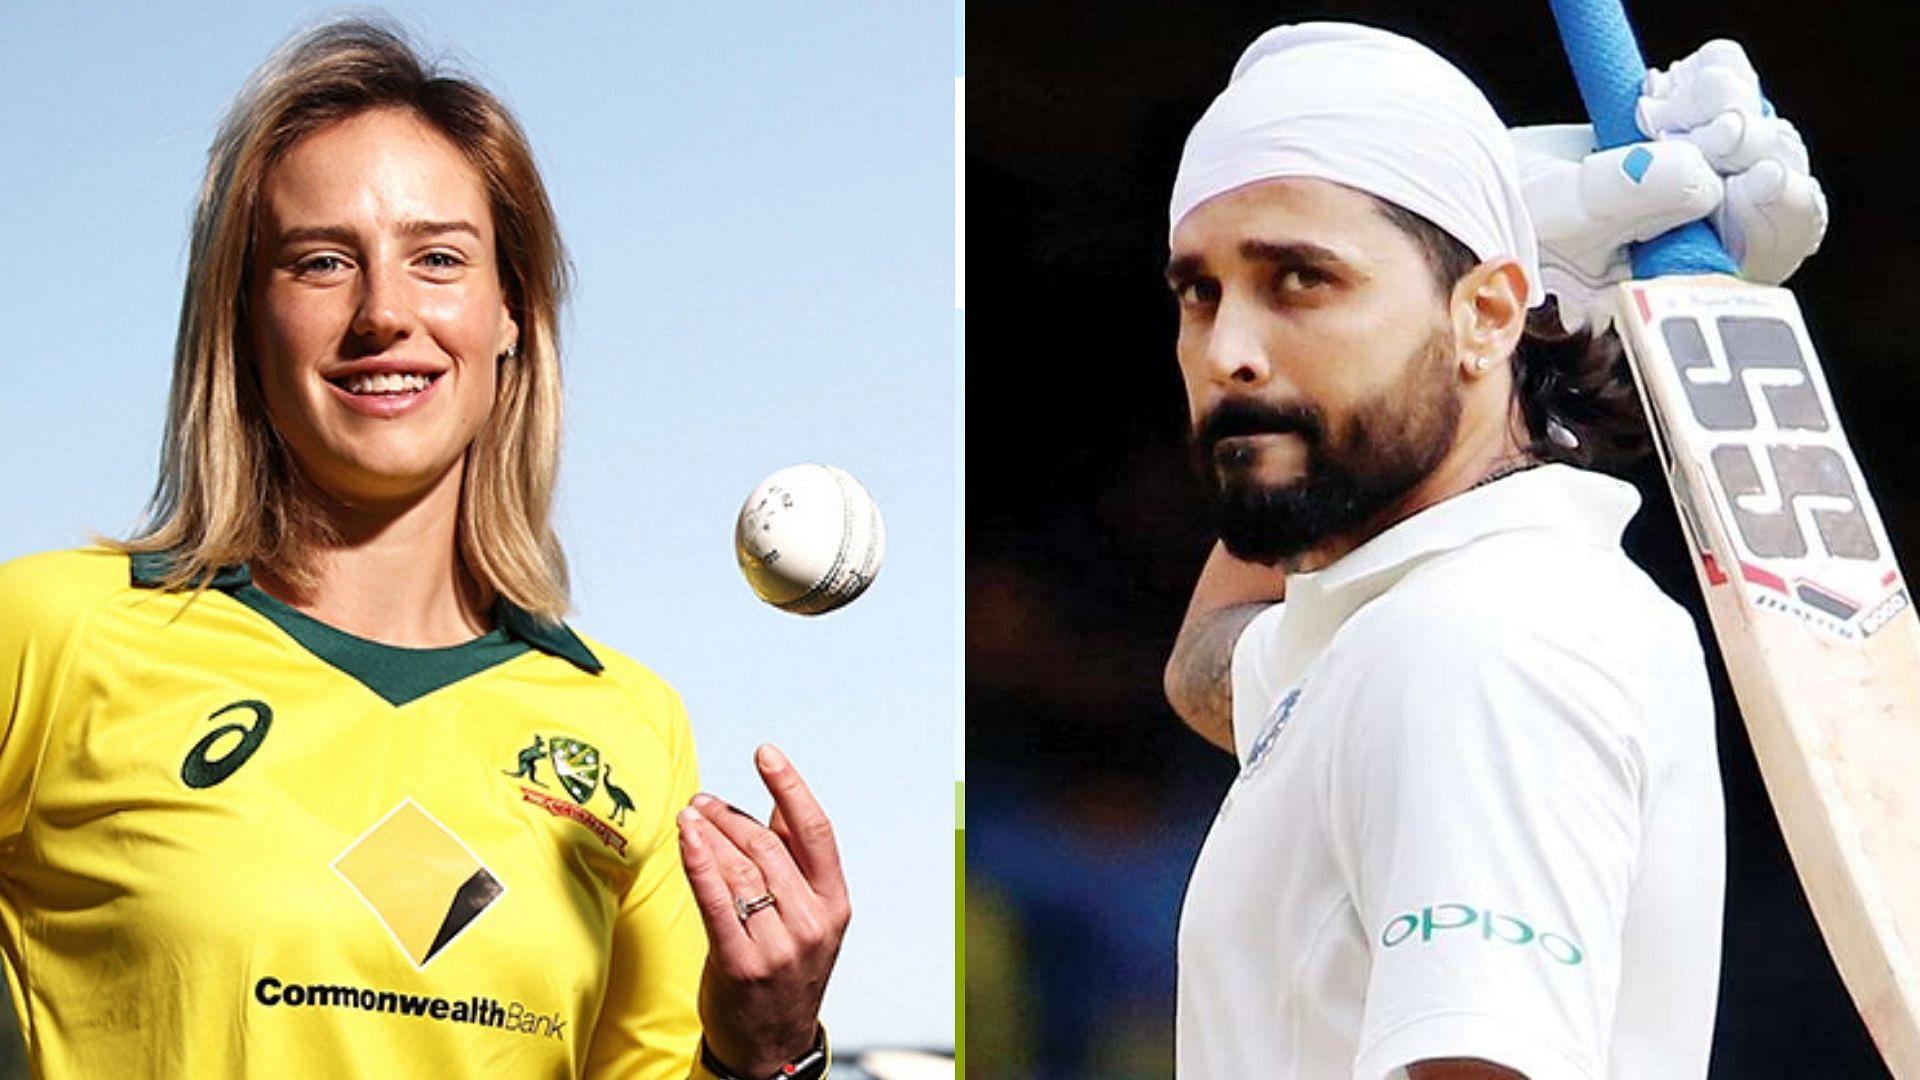 Australia all-rounder Ellyse Perry had a cheeky reply when asked about India batsman Murali Vijay’s admission that he would like to have dinner with her.